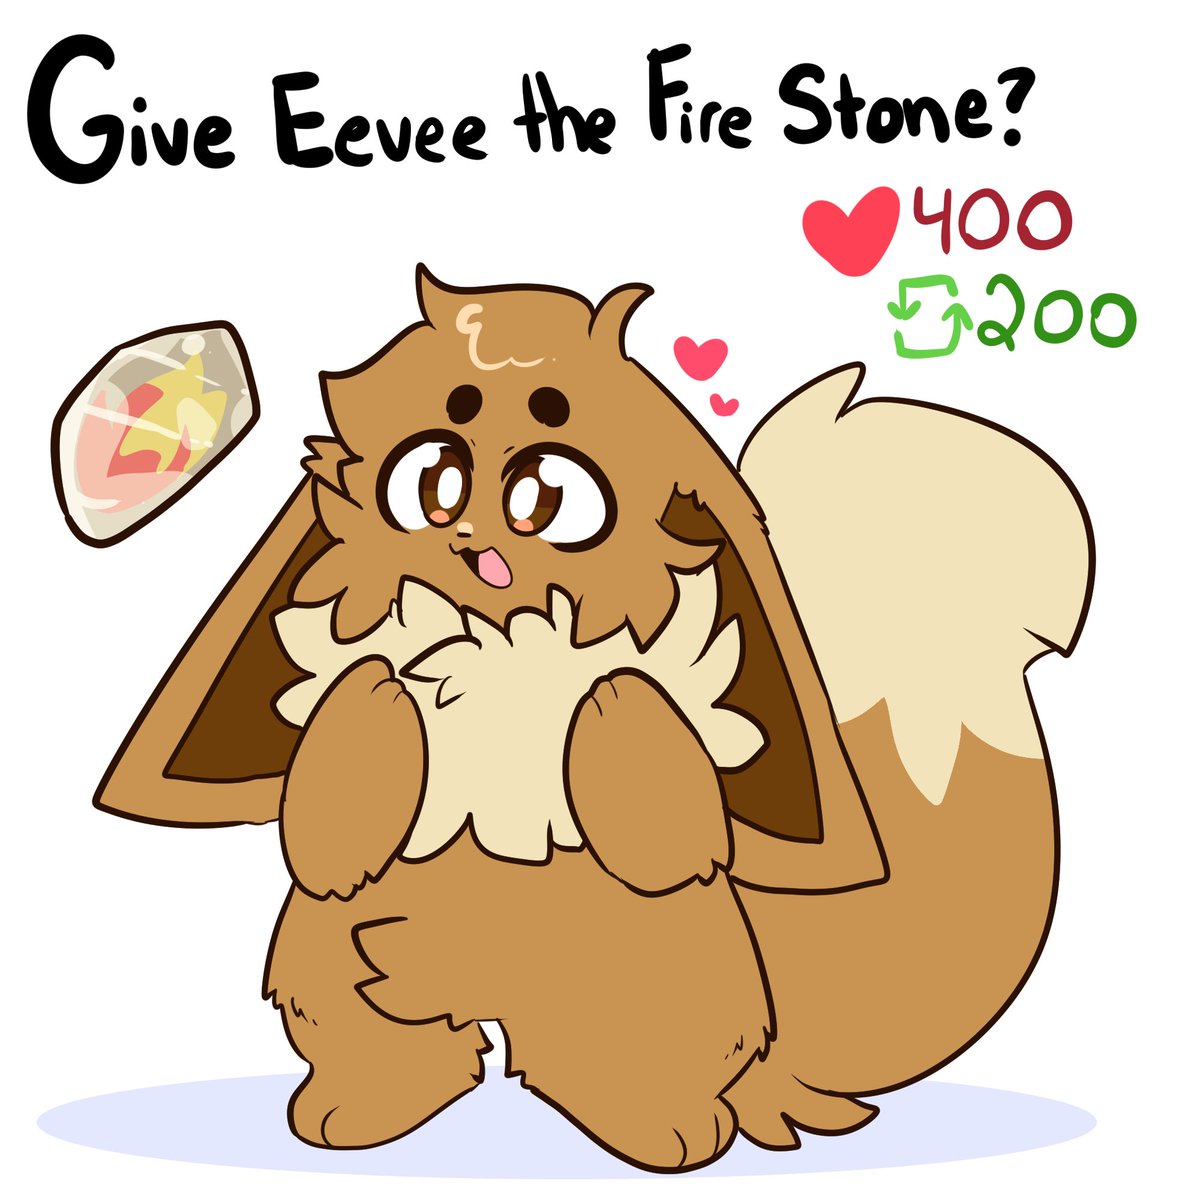 Eevee wants to evolve! Give them the Fire Stone? 🔥✨💕